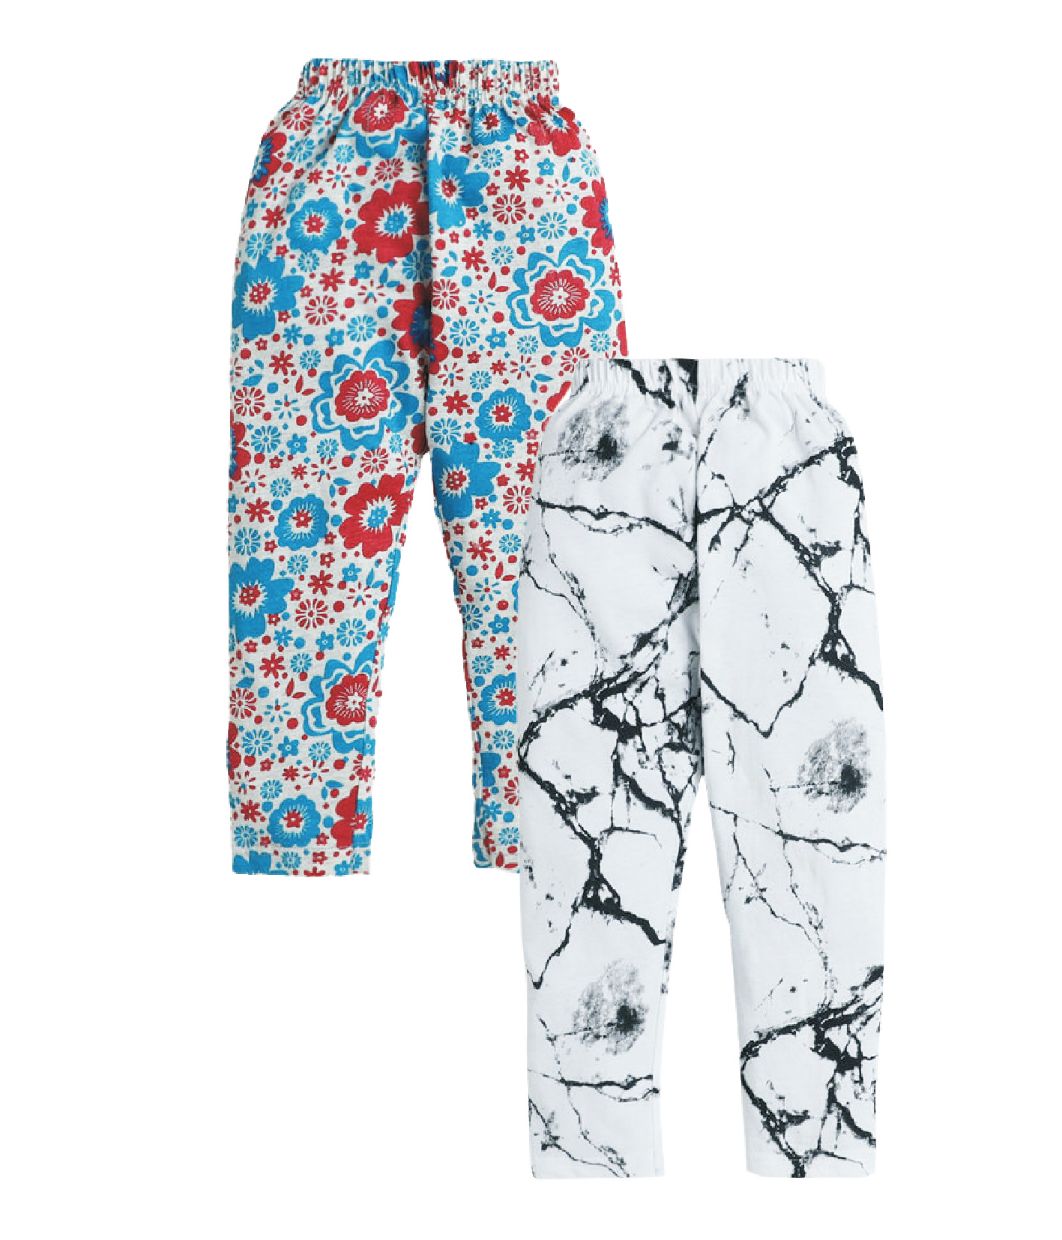 UrDeal Girls Cotton All Over Printed Pack of 2 Leggings